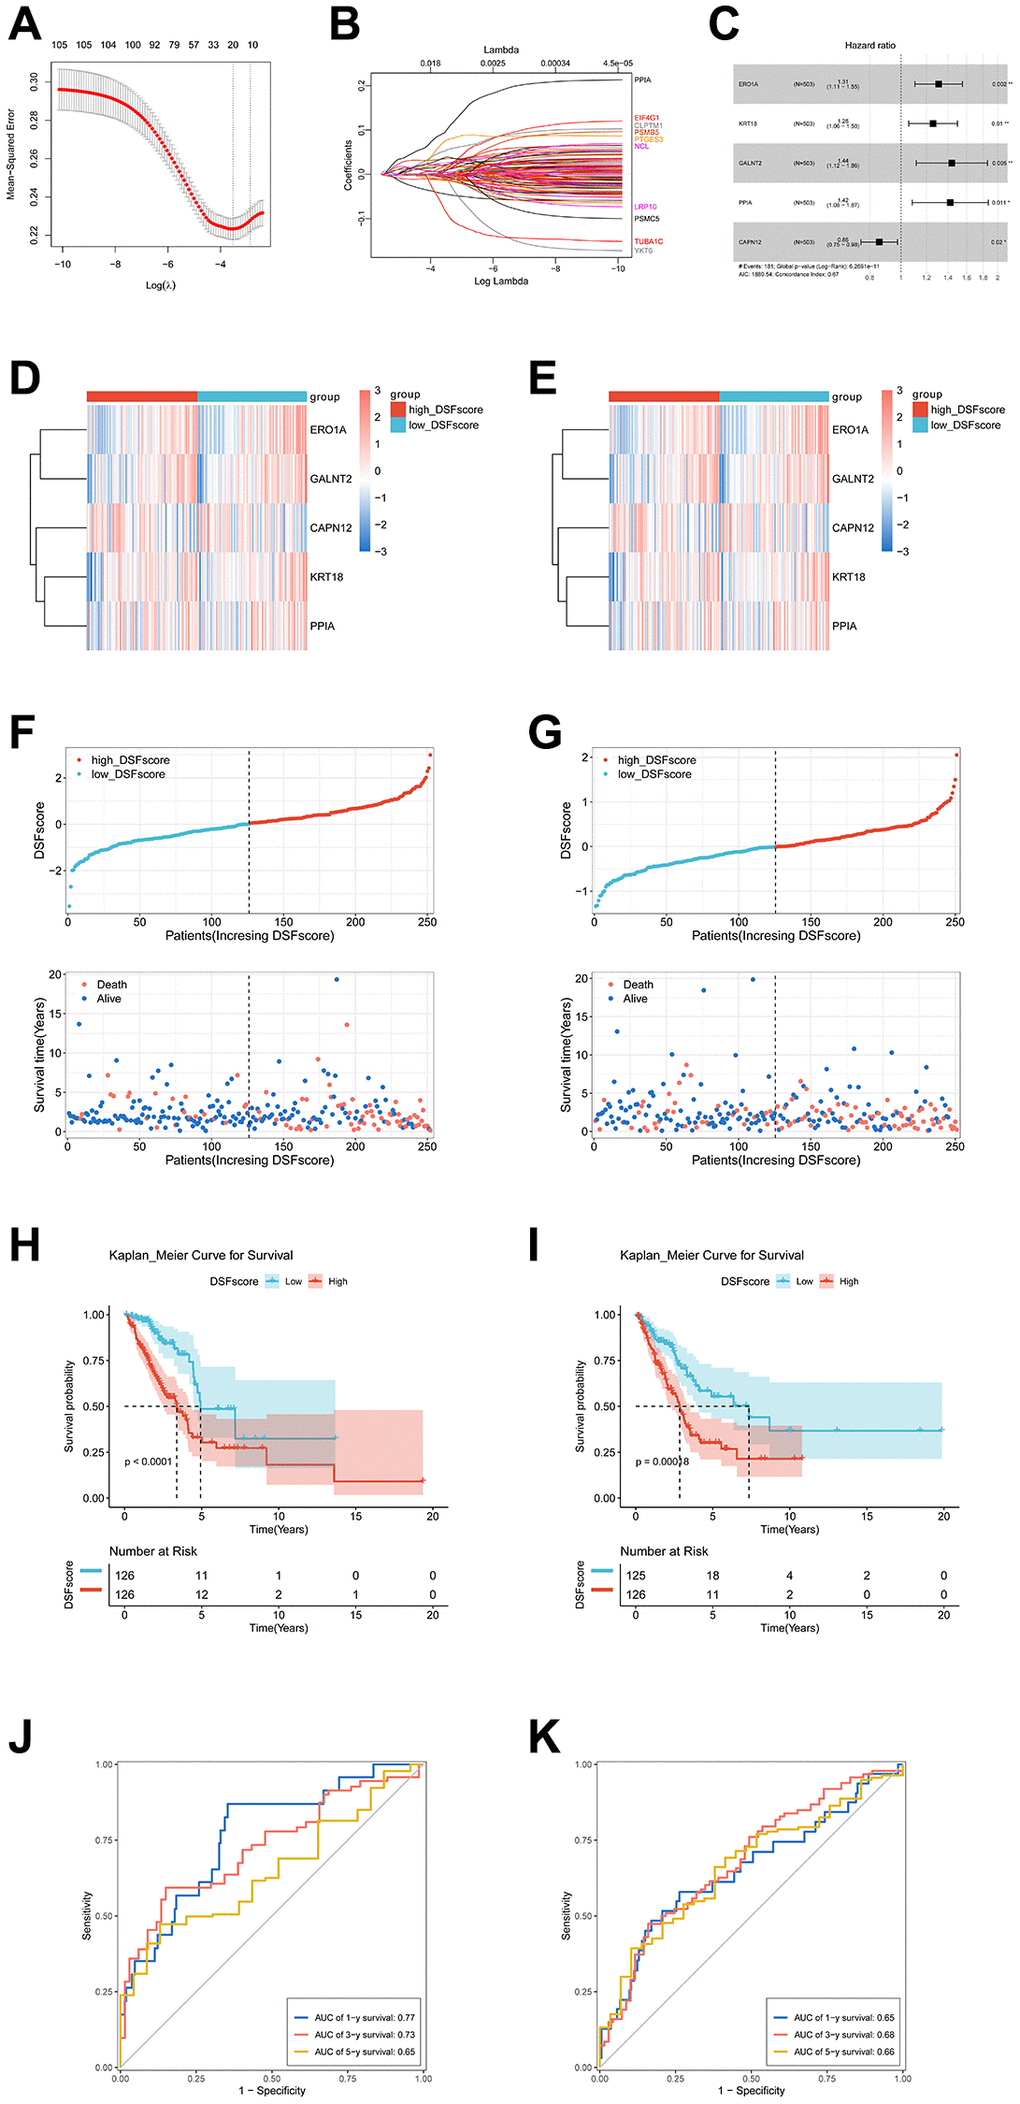 Development and assessment of a DRG-based prognostic model in the TCGA population. (A) Cross-validation for selecting the tuning parameter (λ) in the LASSO model. (B) The coefficient profile of prognostic DRGs using the LASSO method. (C) The multivariate Cox regression analysis of DRGs was presented through a forest plot. (D, E) The heatmap illustrates the differential gene expressions within the DRG prognostic model between the high- and low-risk cohorts in both the TCGA training and testing cohorts. (F, G) Risk score distribution plot and risk point plot between the high- and low-risk groups in TCGA training and testing cohorts. (H, I) The Kaplan-Meier OS curves for patients in two risk groups in TCGA training and testing cohorts. (J, K) ROC curves showed the prognostic performance of the DRG prognostic model in TCGA training and testing cohorts.